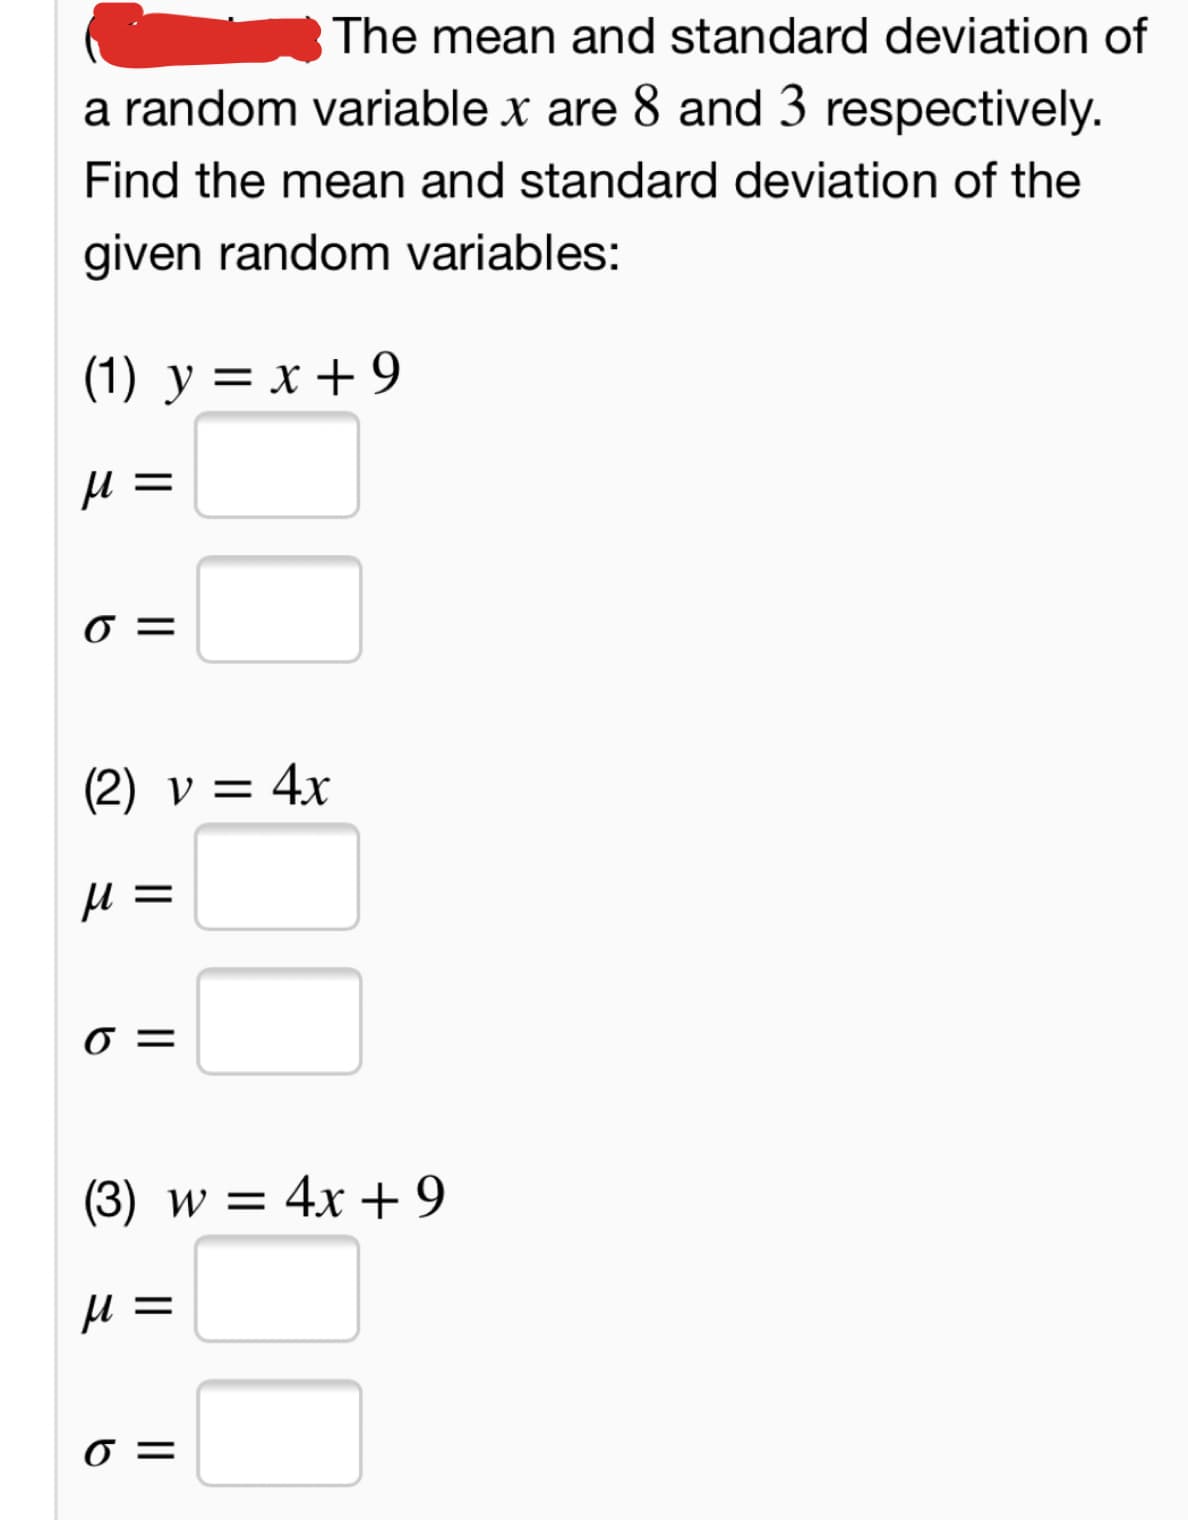 The mean and standard deviation of
a random variable x are 8 and 3 respectively.
Find the mean and standard deviation of the
given random variables:
(1) y = x + 9
||
(2) v = 4x
(3) w = 4x+9
||
=
II
